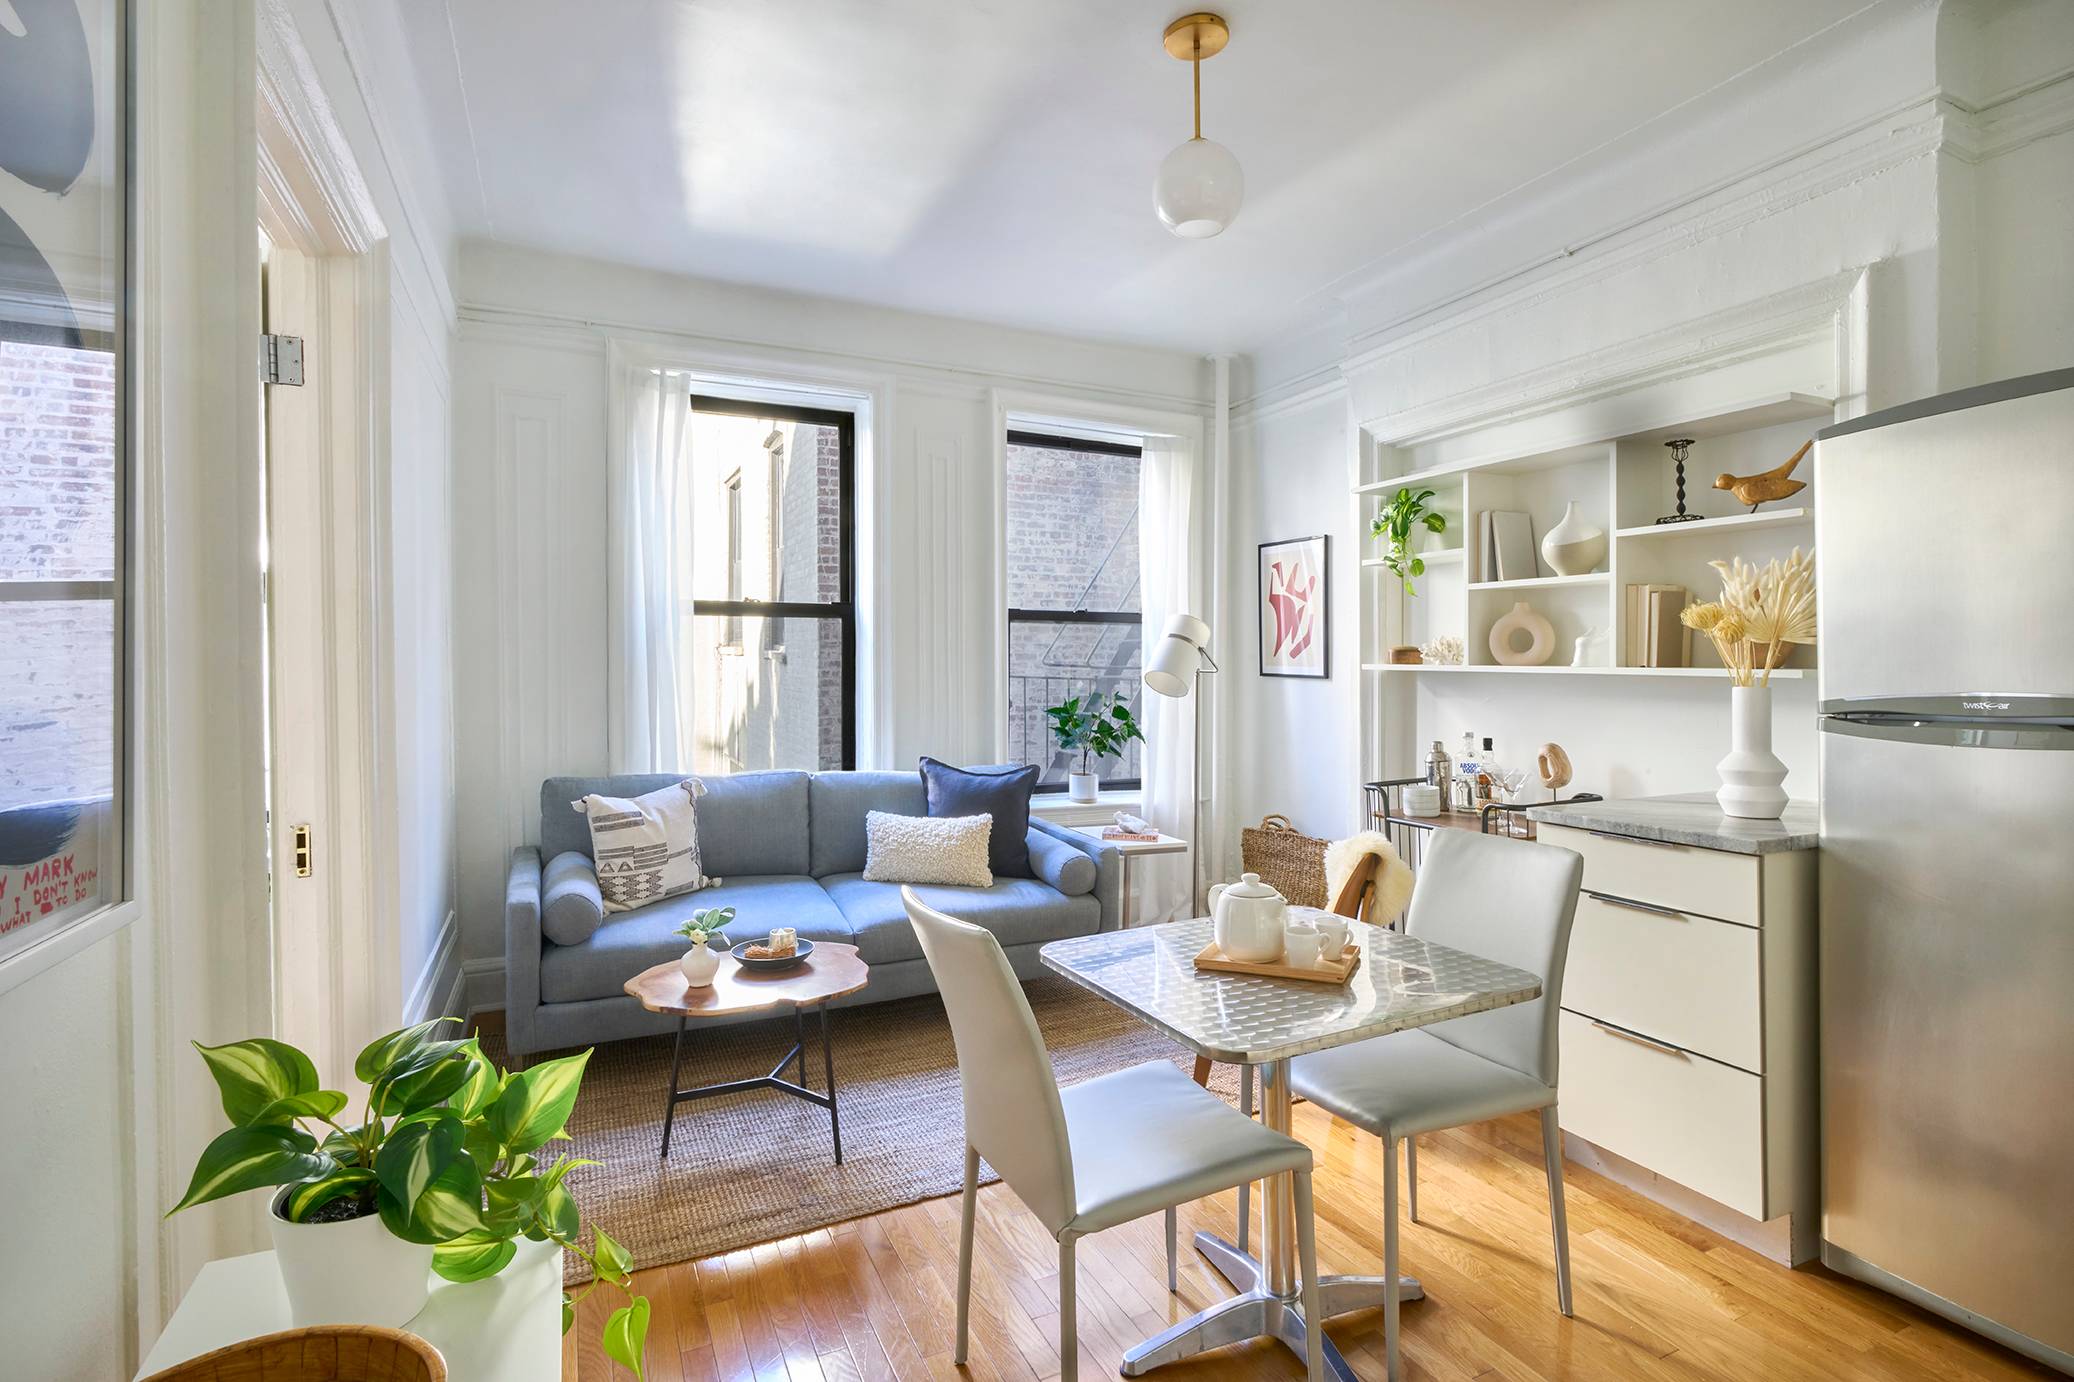 PRICE IMPROVEMENT ! This sunny, charming apartment is an ideal opportunity for your first Prospect Heights home !